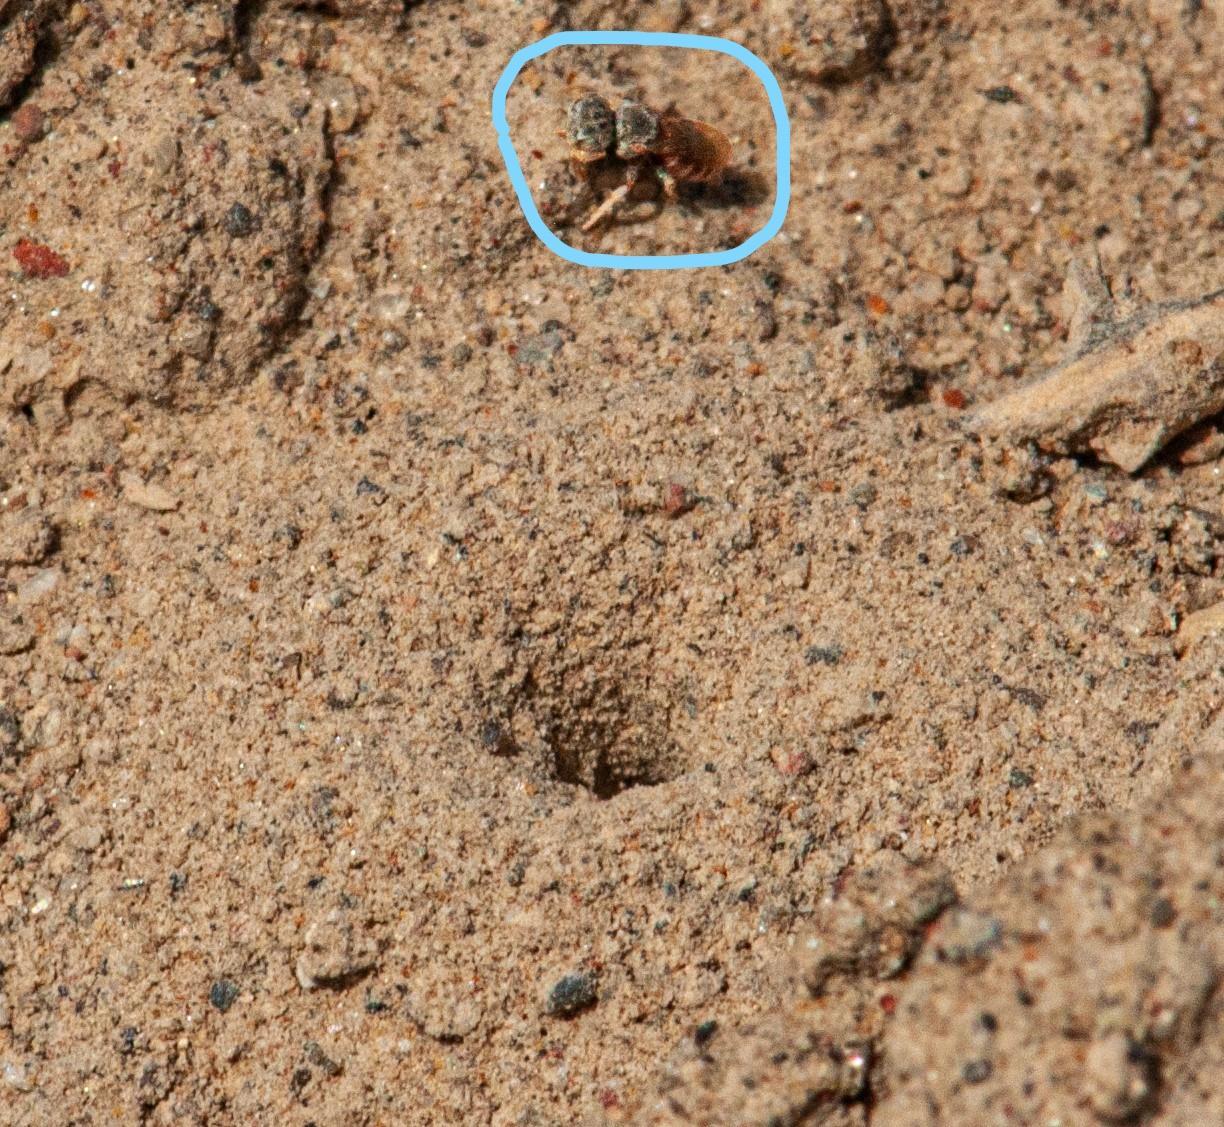 Photo of a Neolarra female waiting outside the entrance to a fairy bee's ground nest. She is waiting for the female fair